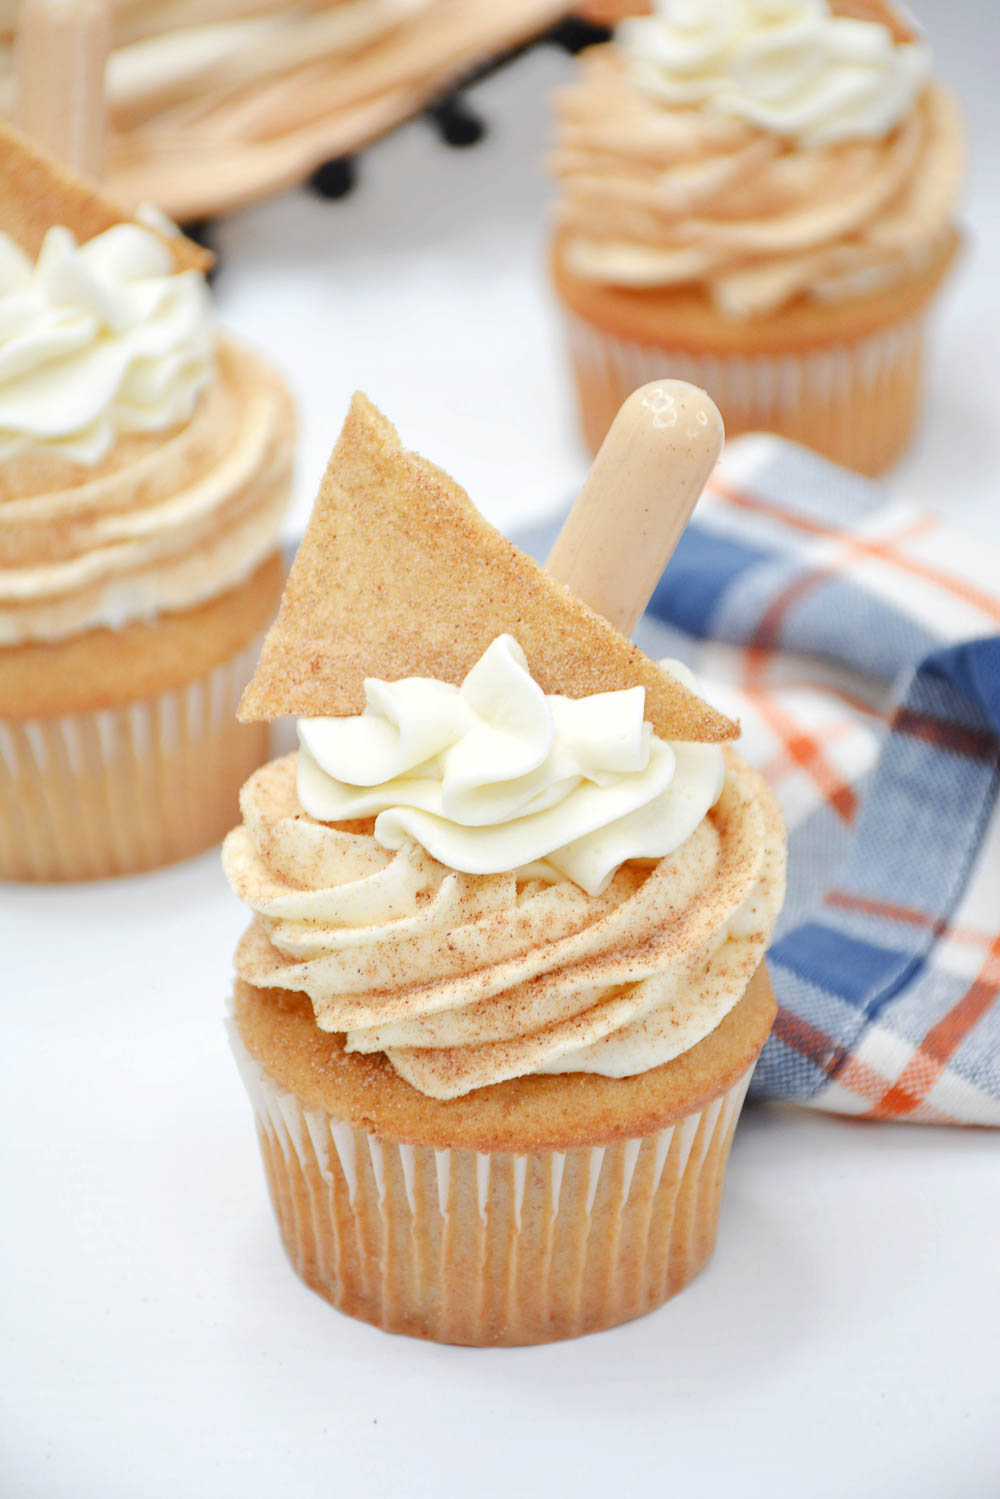 If you like cupcakes and you like horchata, buckle up. These horchata cupcakes with cinnamon frosting are soft, fluffy, and delicious. They are an instant staple in every house. For sure.